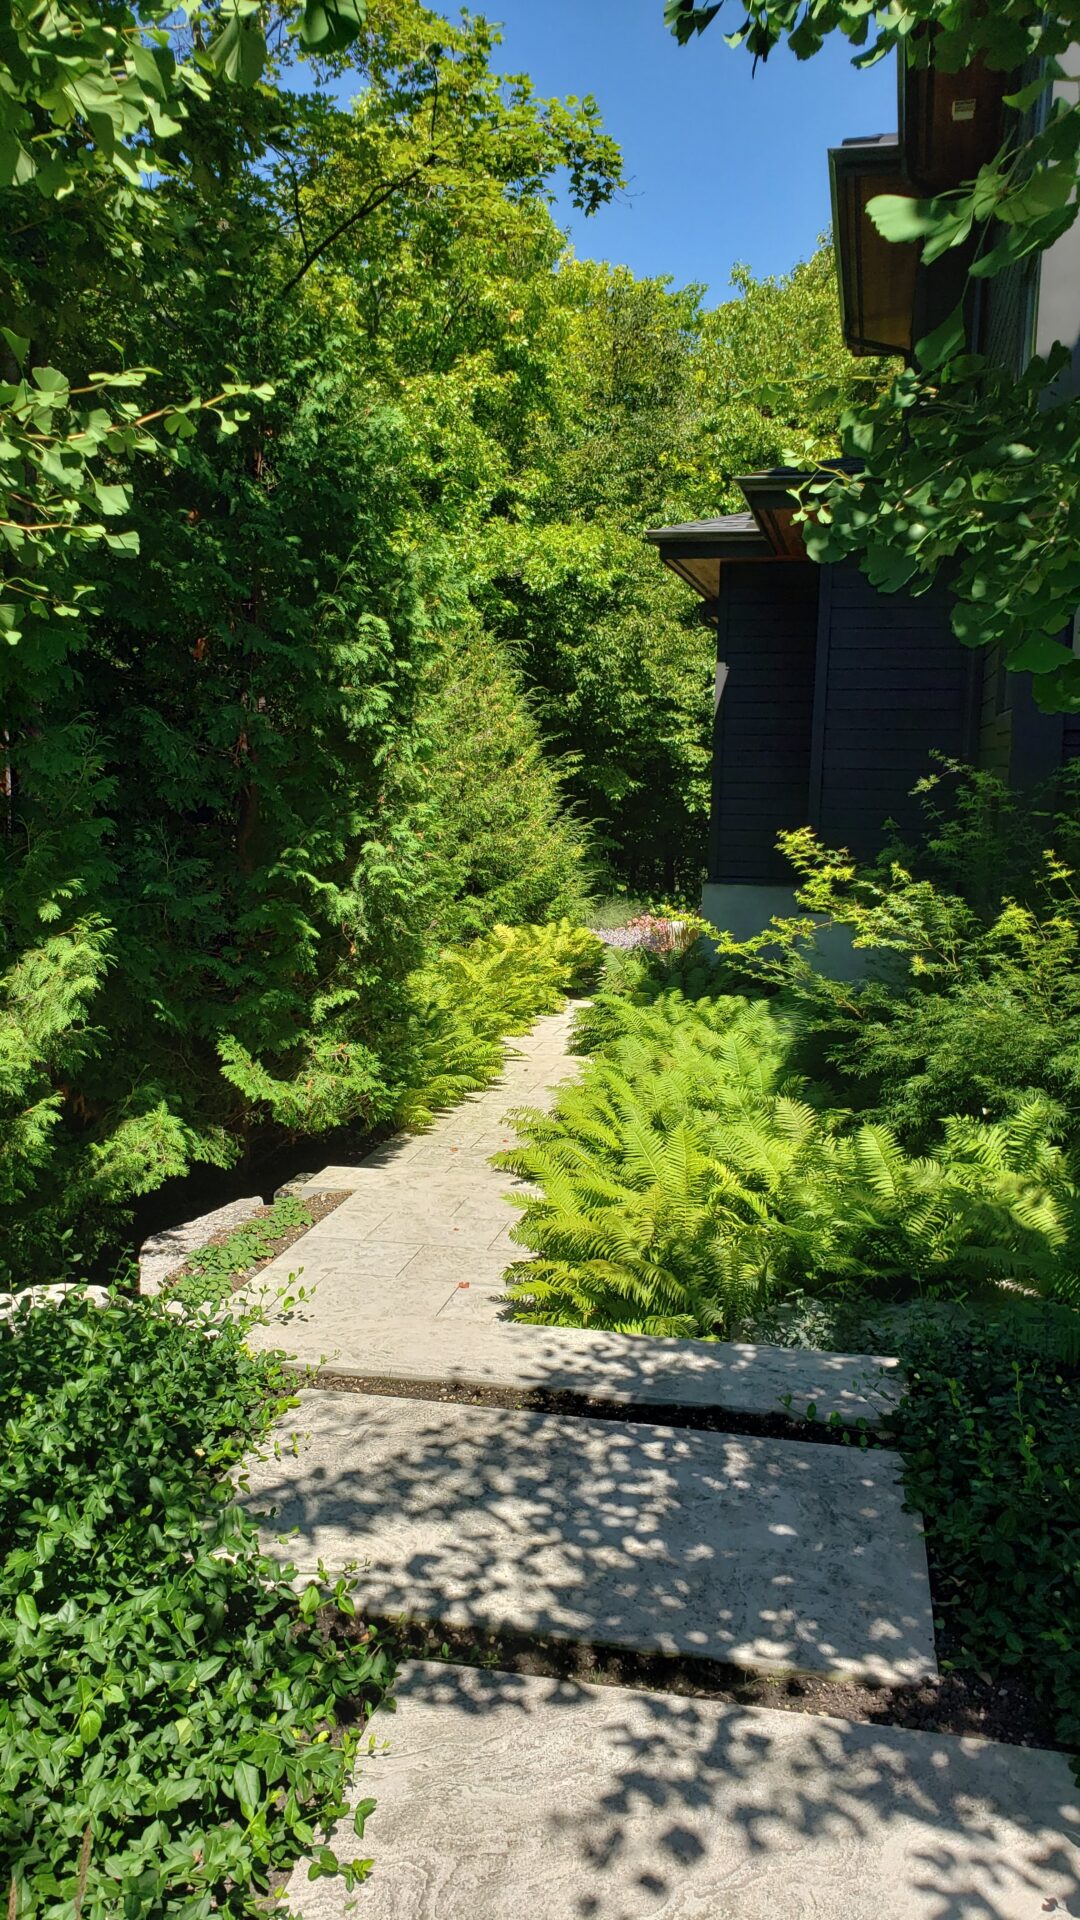 A stone walkway leads into lush greenery with ferns and trees, alongside a dark-colored building under a bright blue sky. Shadows dapple the path.